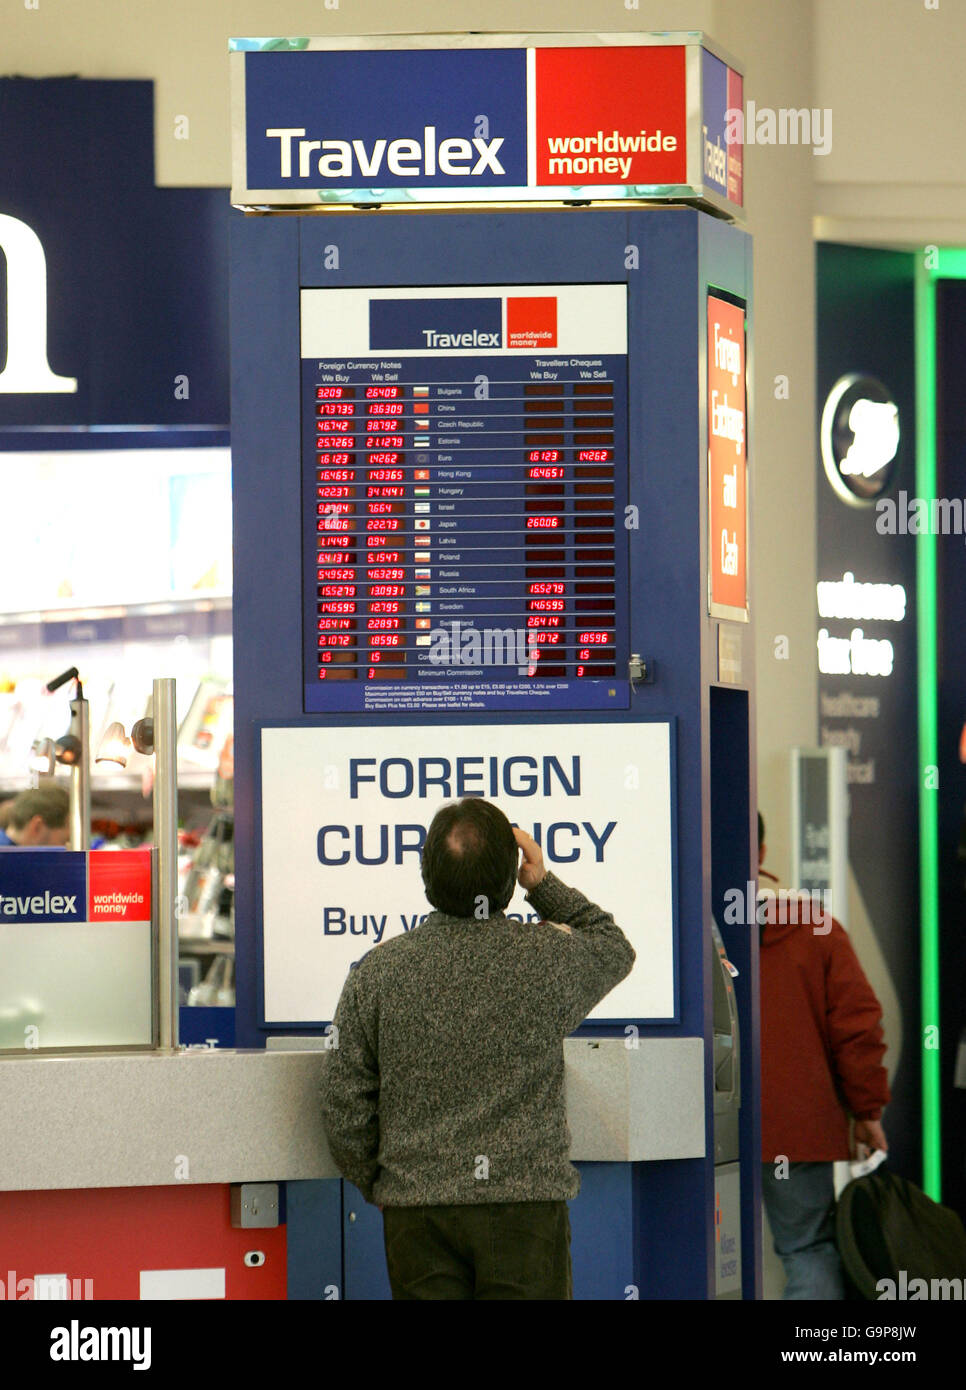 Personal Finance pics. The branch of Travelex, the Foreign Currency trader, at Heathrow's Terminal 1 Stock Photo